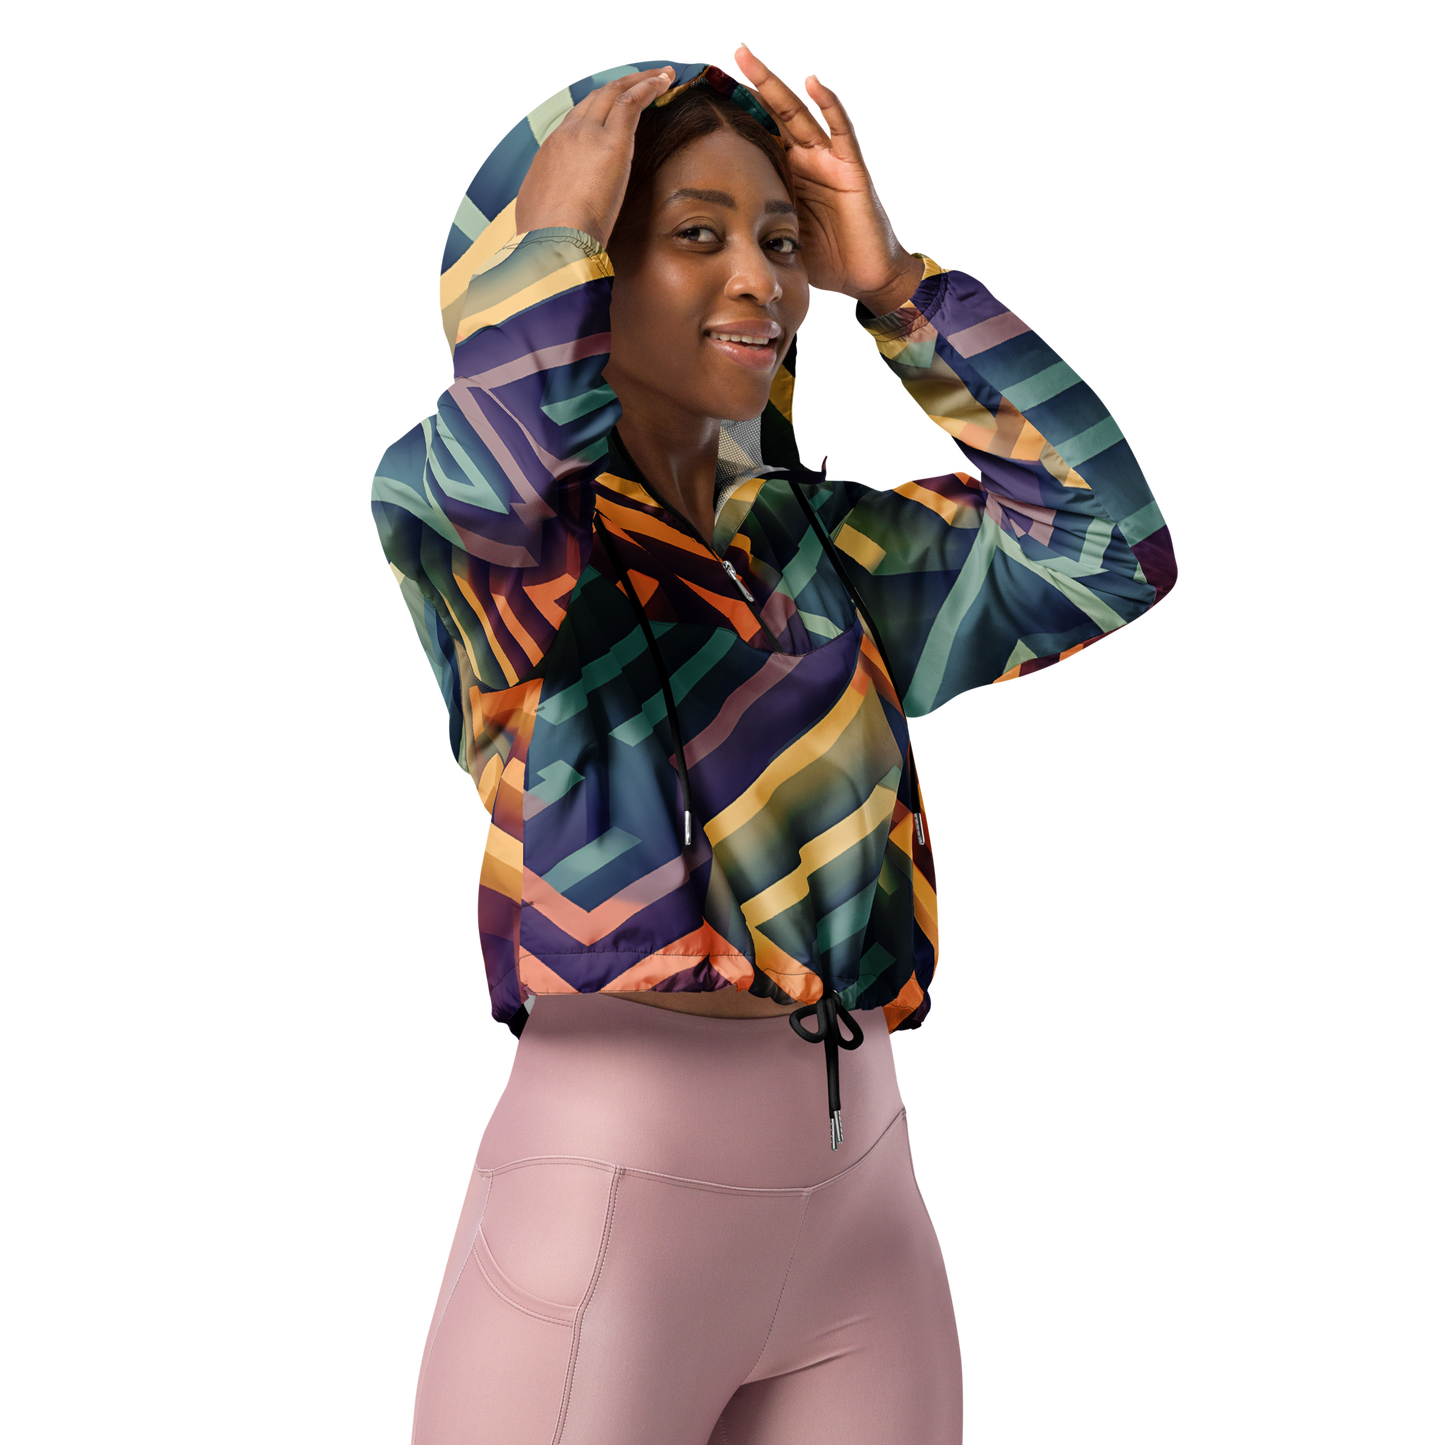 3D Maze Illusion | 3D Patterns | All-Over Print Women's Cropped Windbreaker - #3